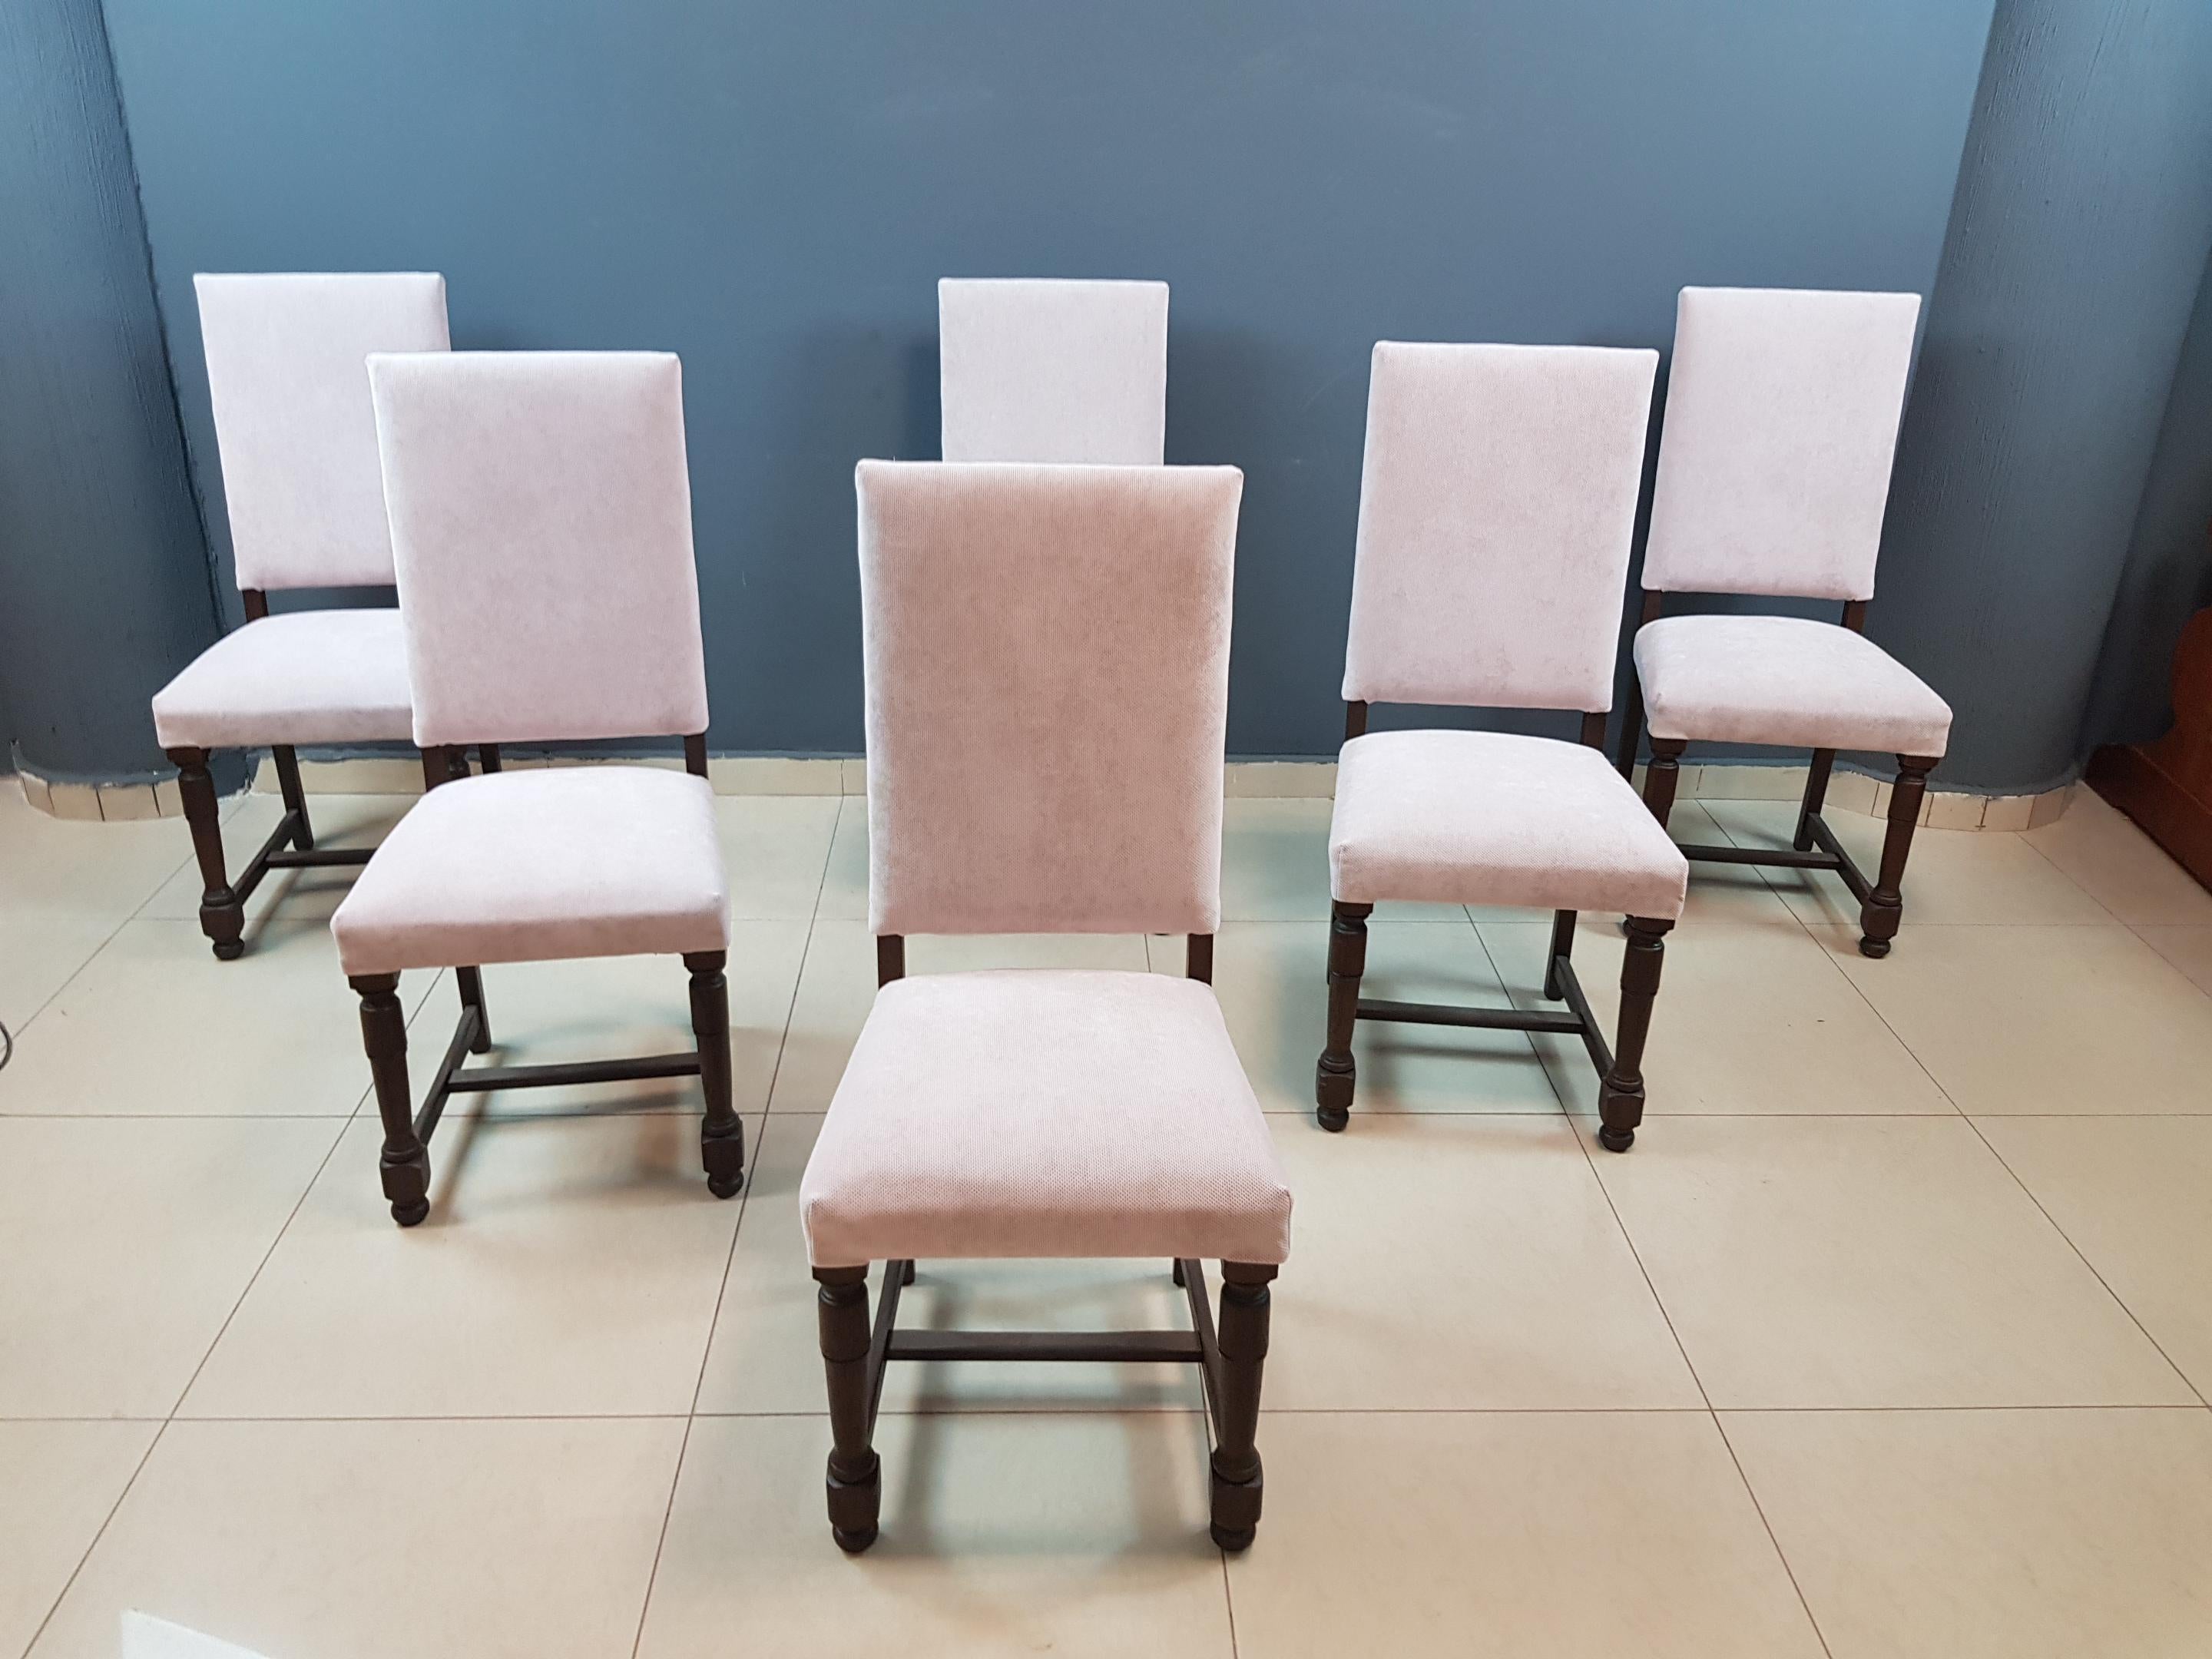 French Vintage Square Back Dining Chairs - Set of 6 For Sale 1